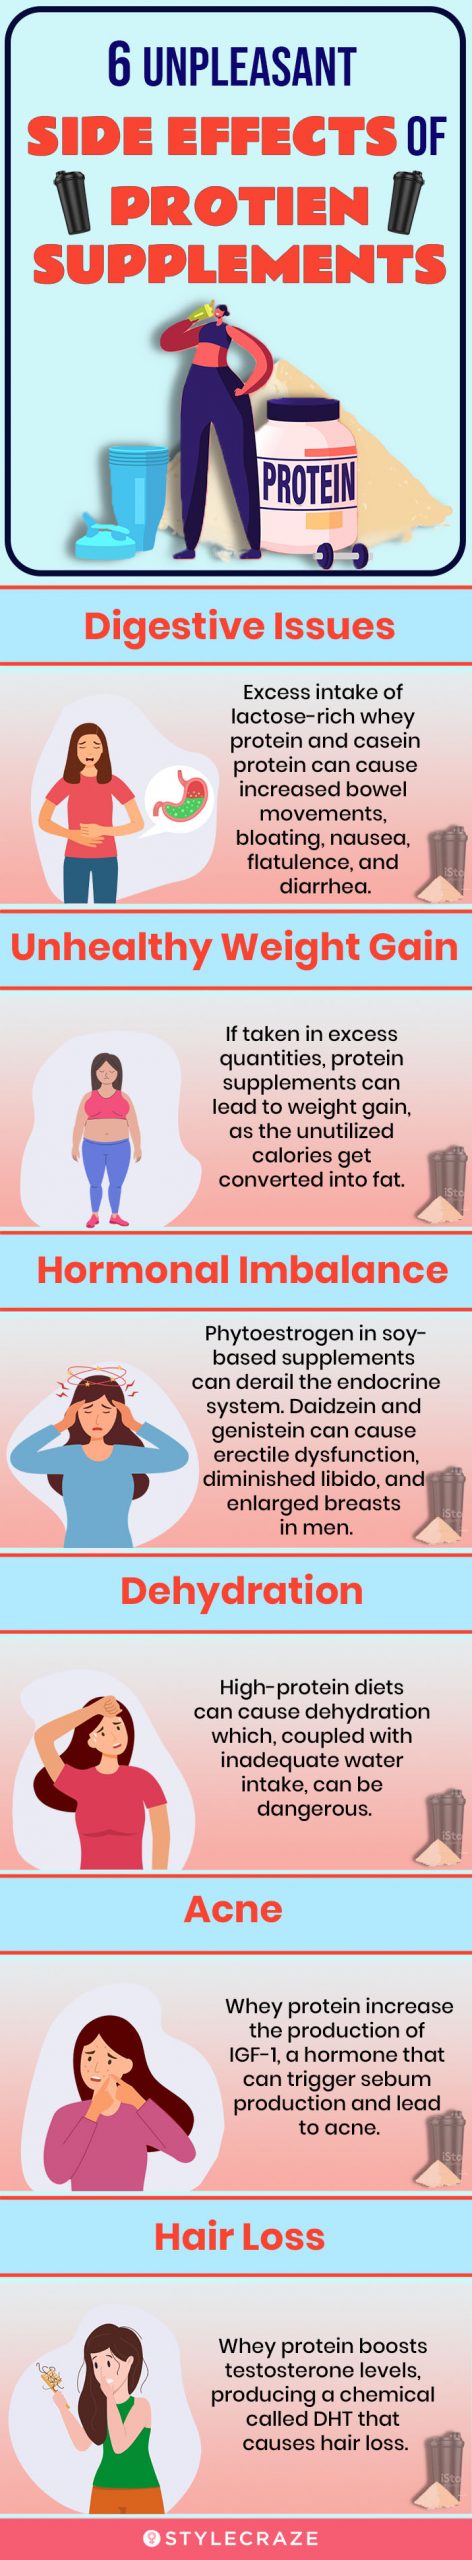 6 unpleasant side effects of protein supplements (infographic)